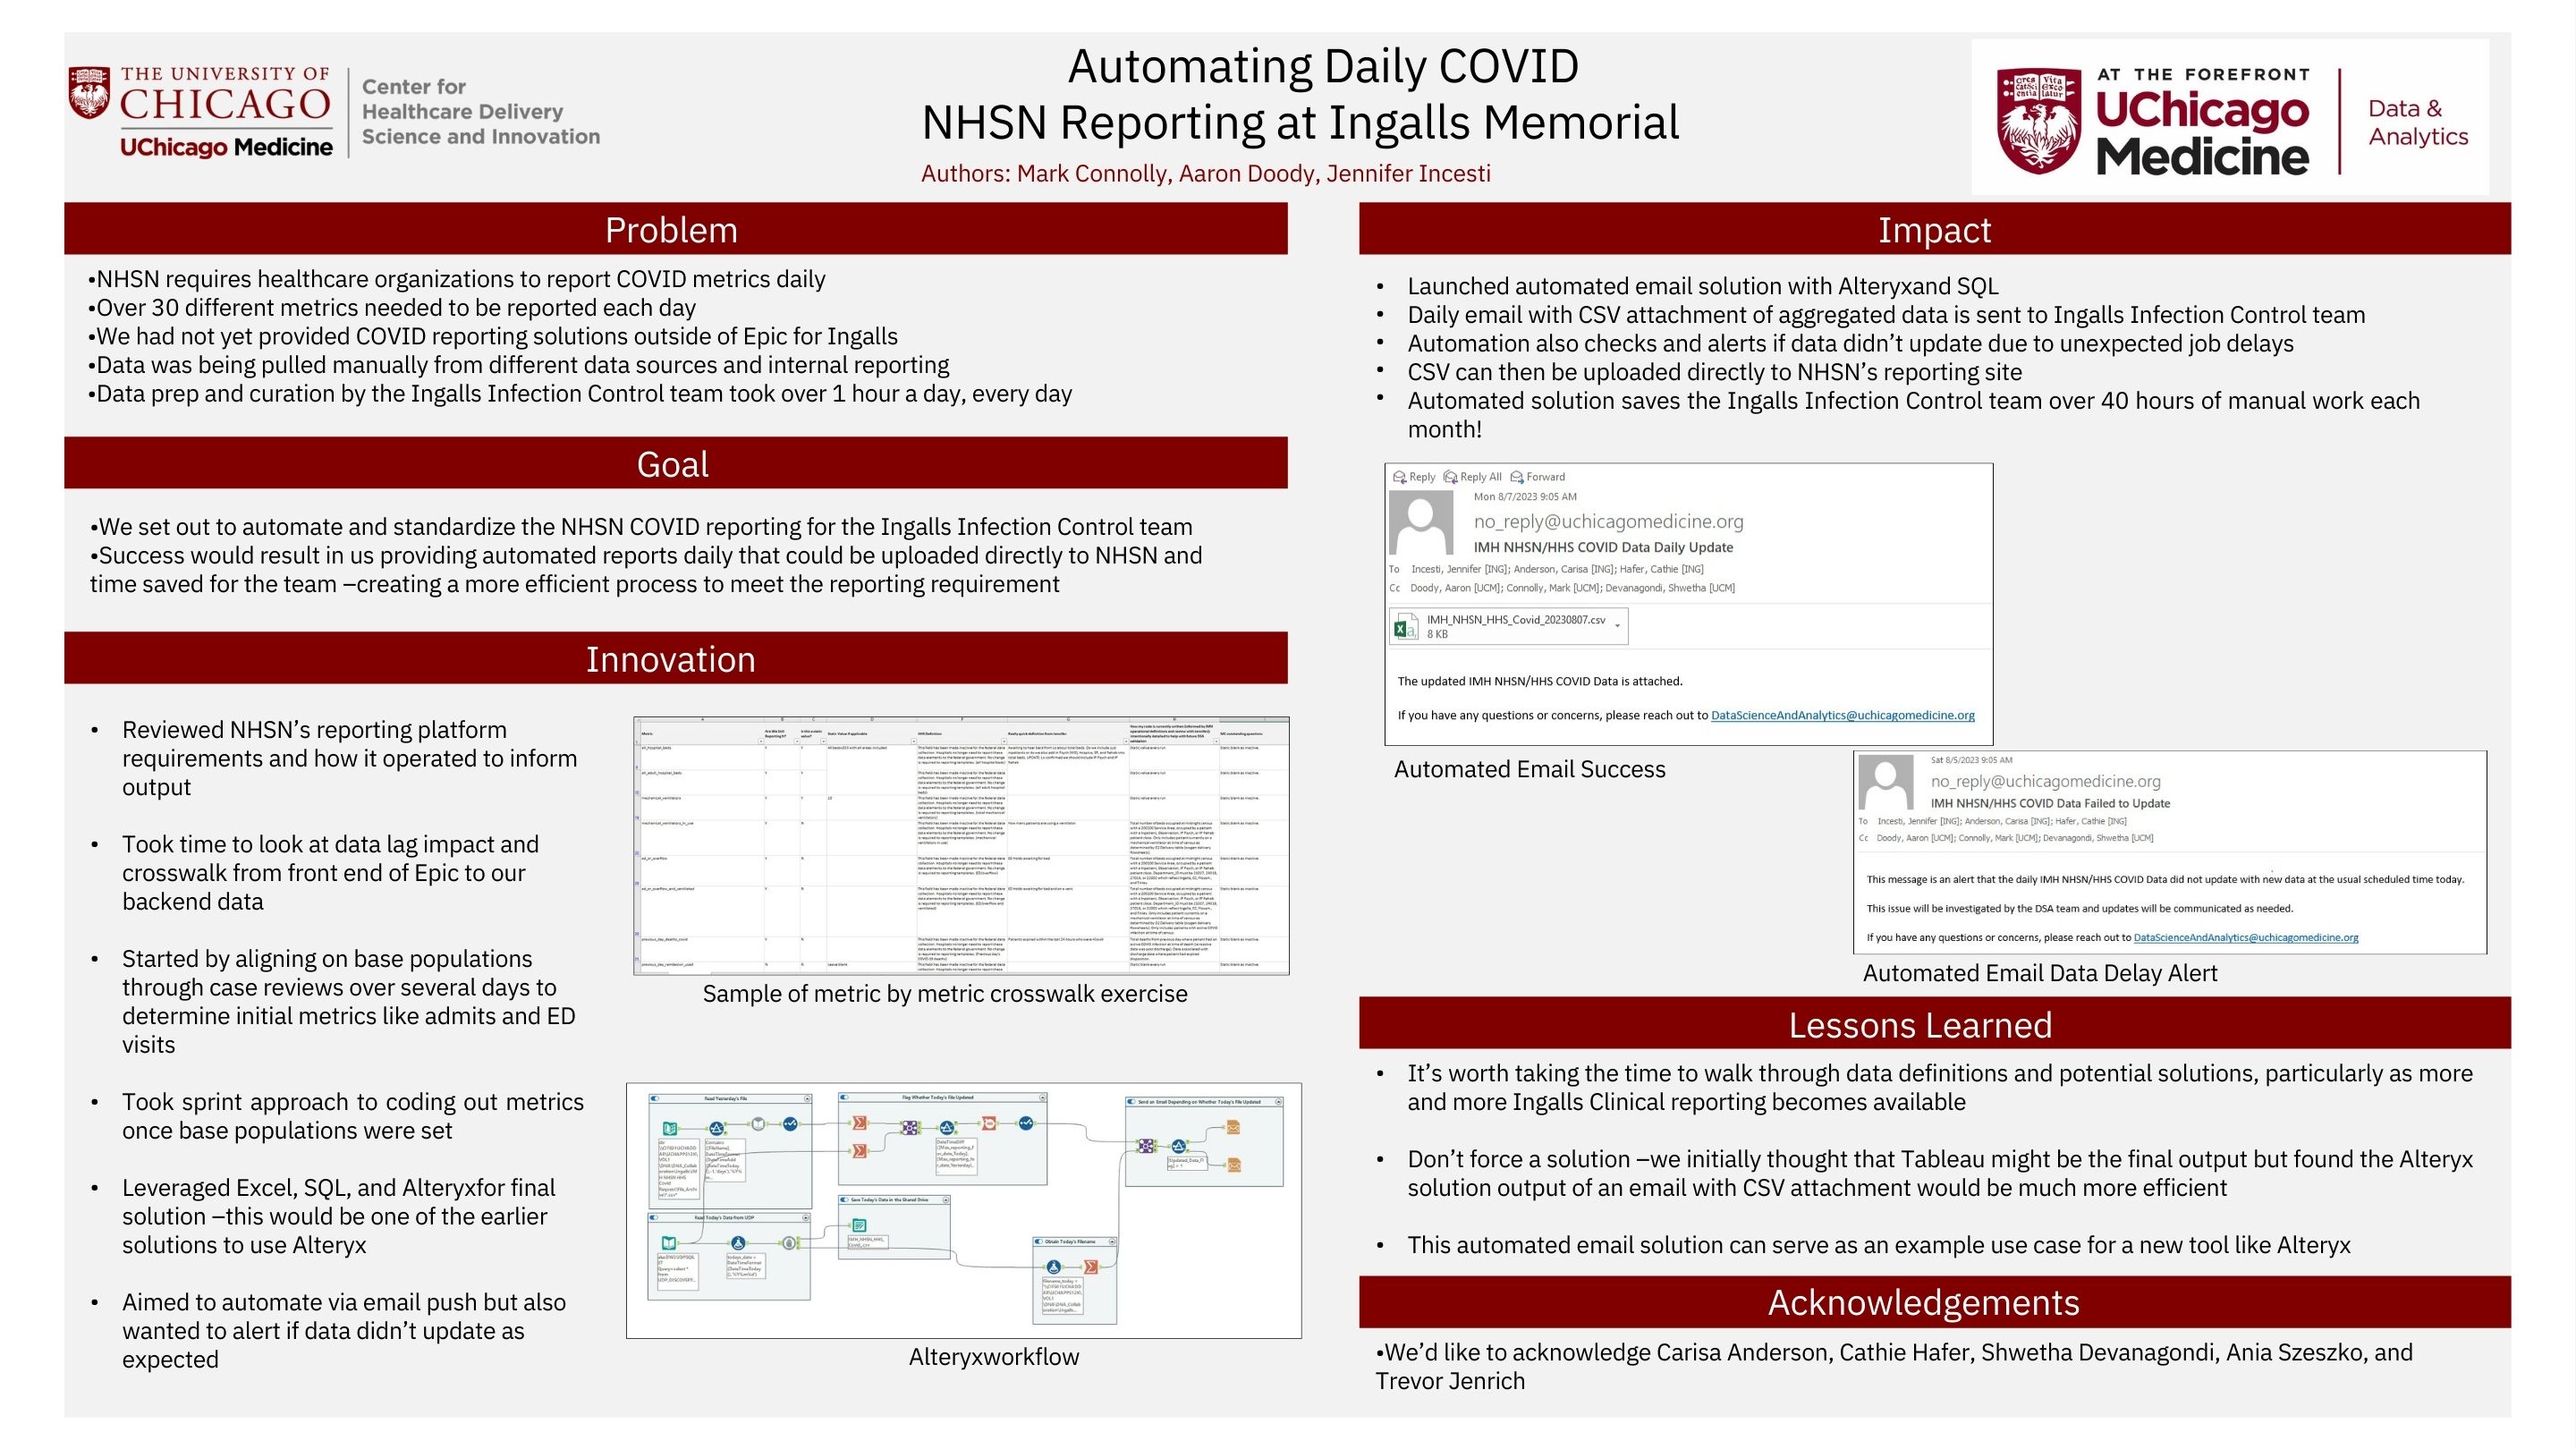 CONNOLLY_Automating Daily COVID NHSN Reporting at Ingalls Memorial